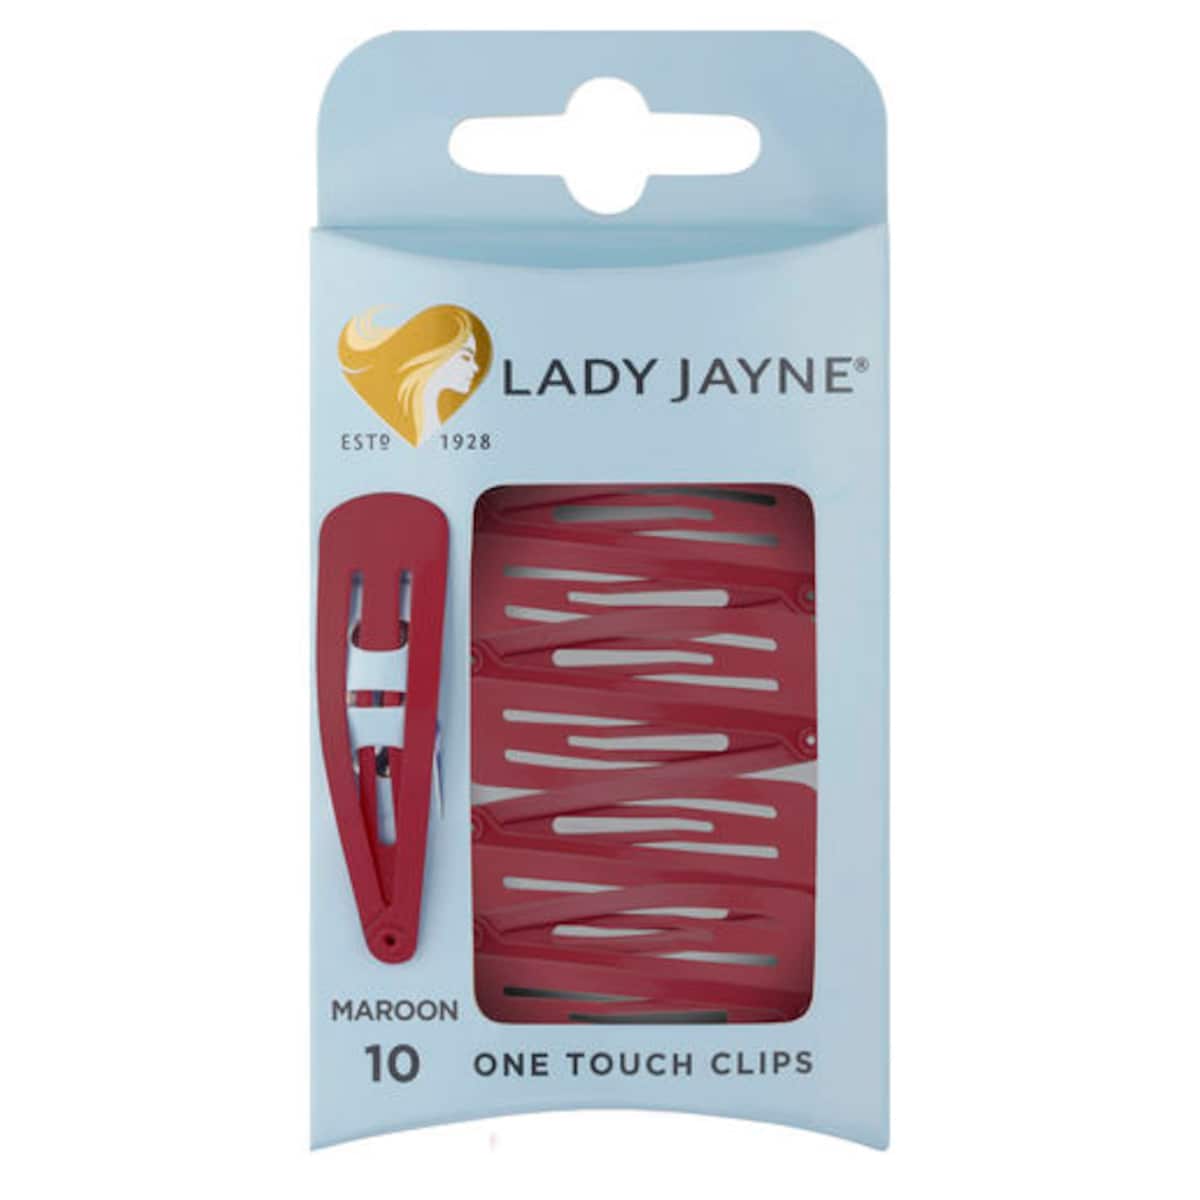 Lady Jayne One Touch Clips Maroon 10 Pack